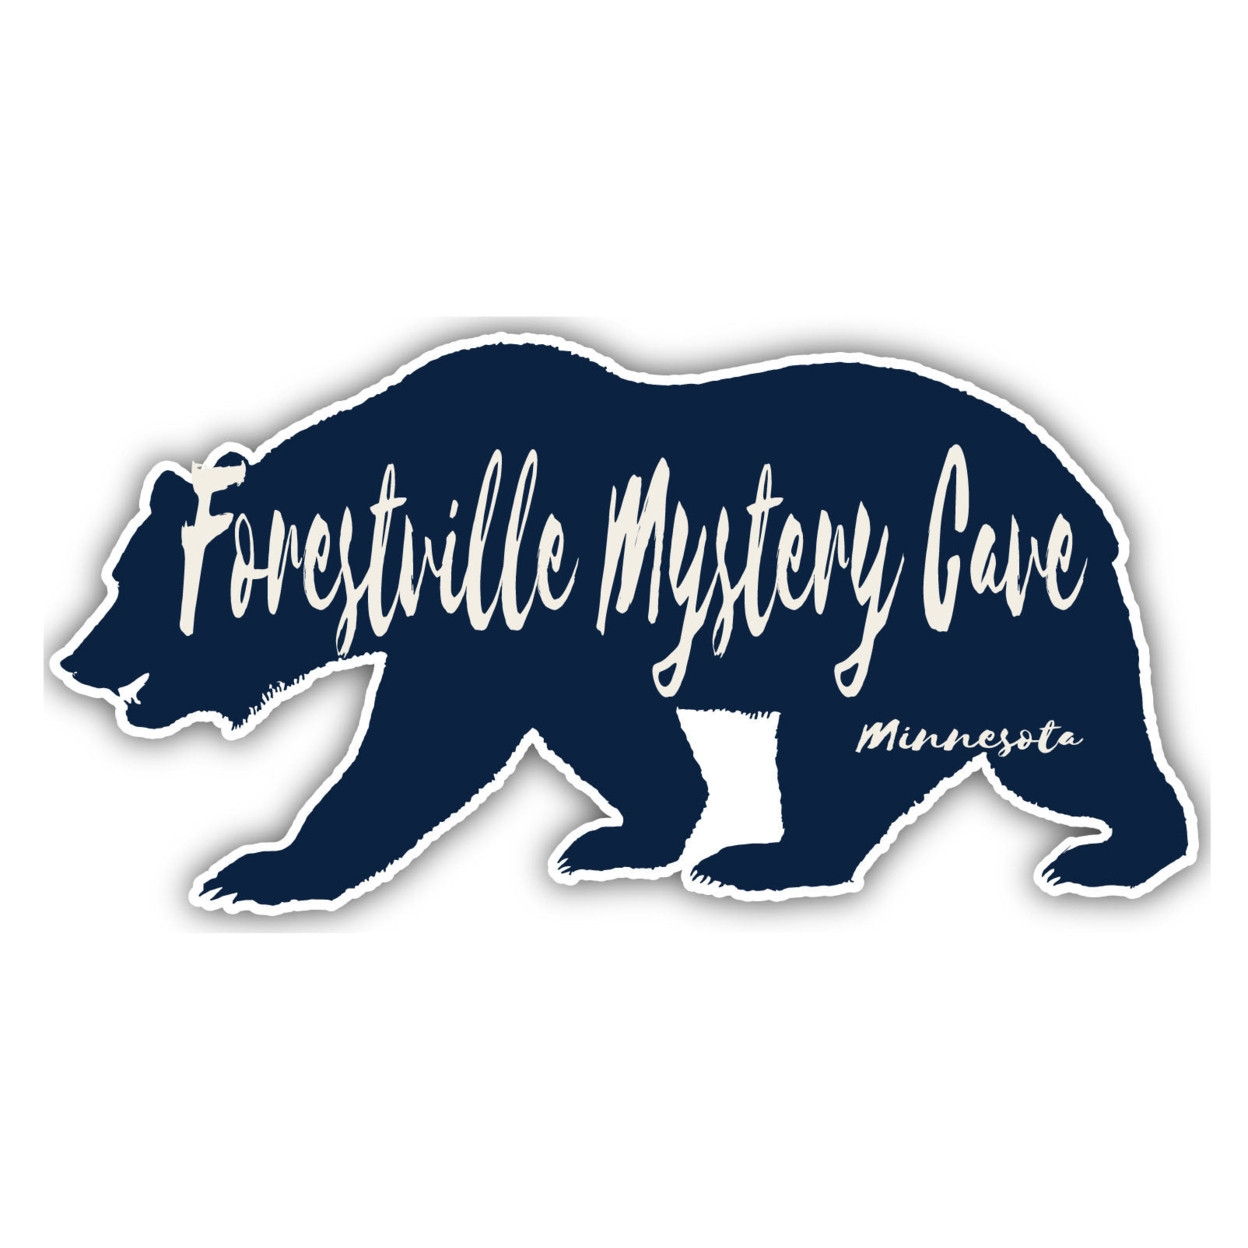 Forestville Mystery Cave Minnesota Souvenir Decorative Stickers (Choose Theme And Size) - 4-Pack, 4-Inch, Bear